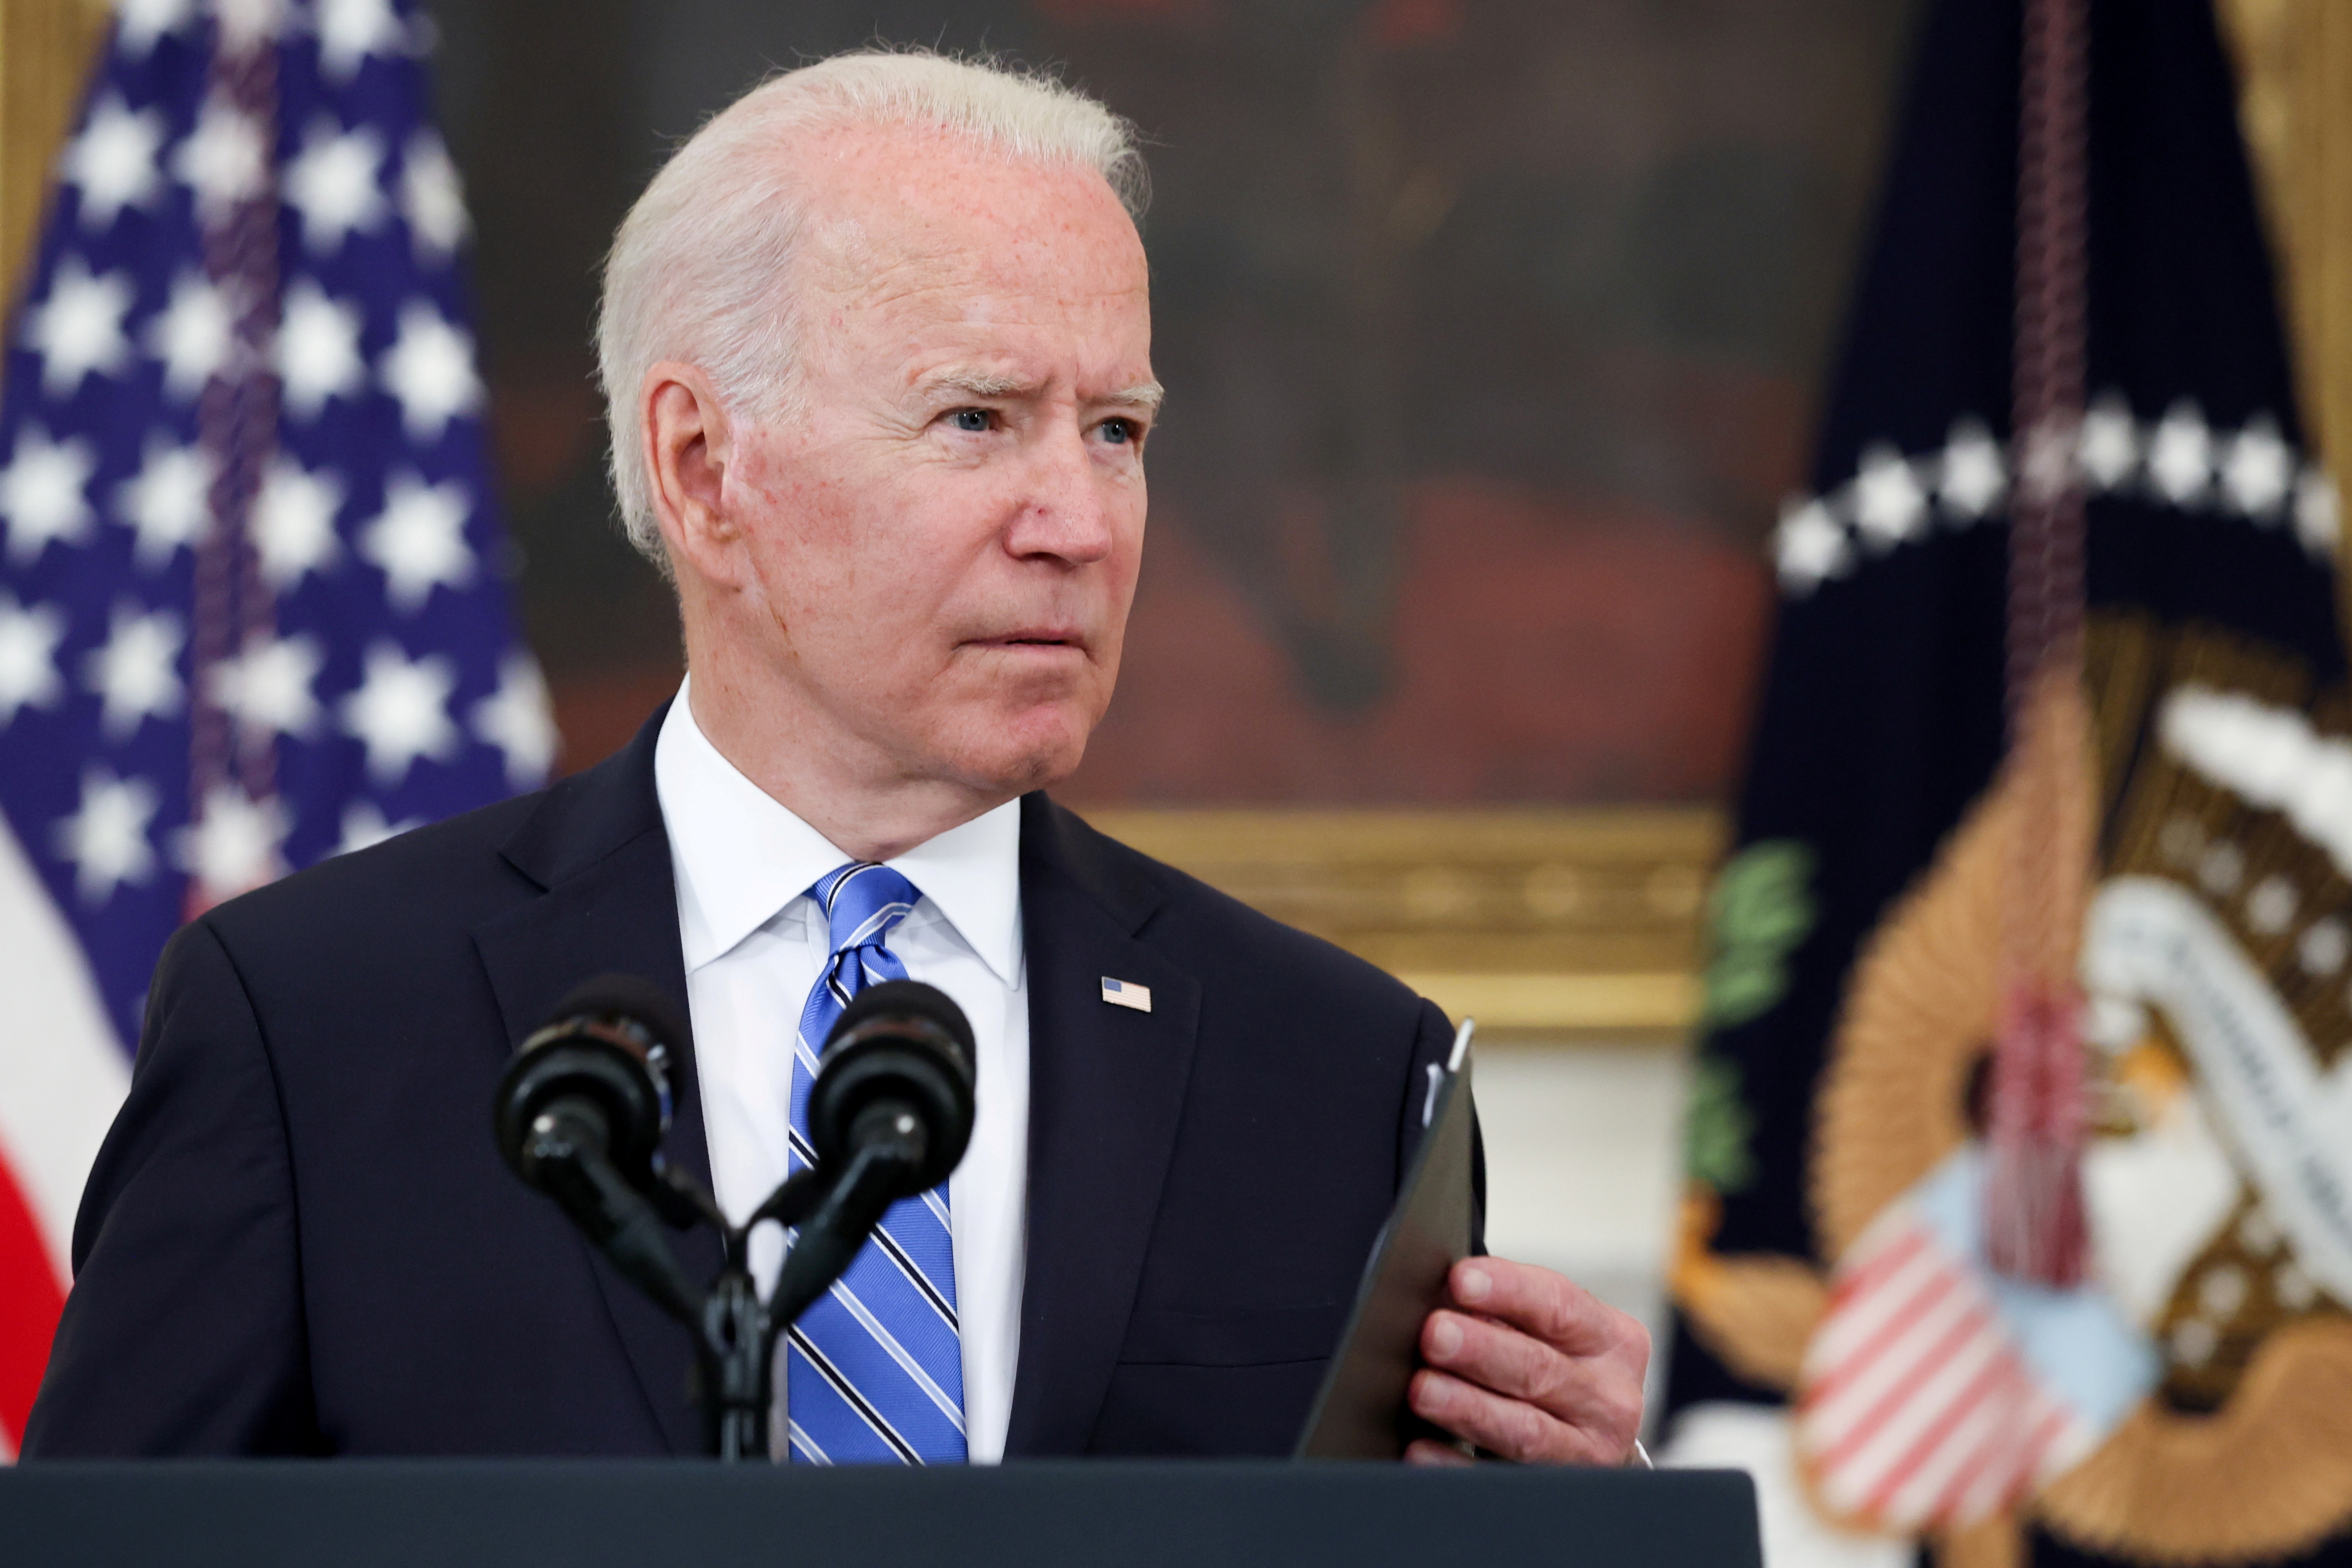 U.S. President Biden delivers remarks on the economy at the White House in Washington